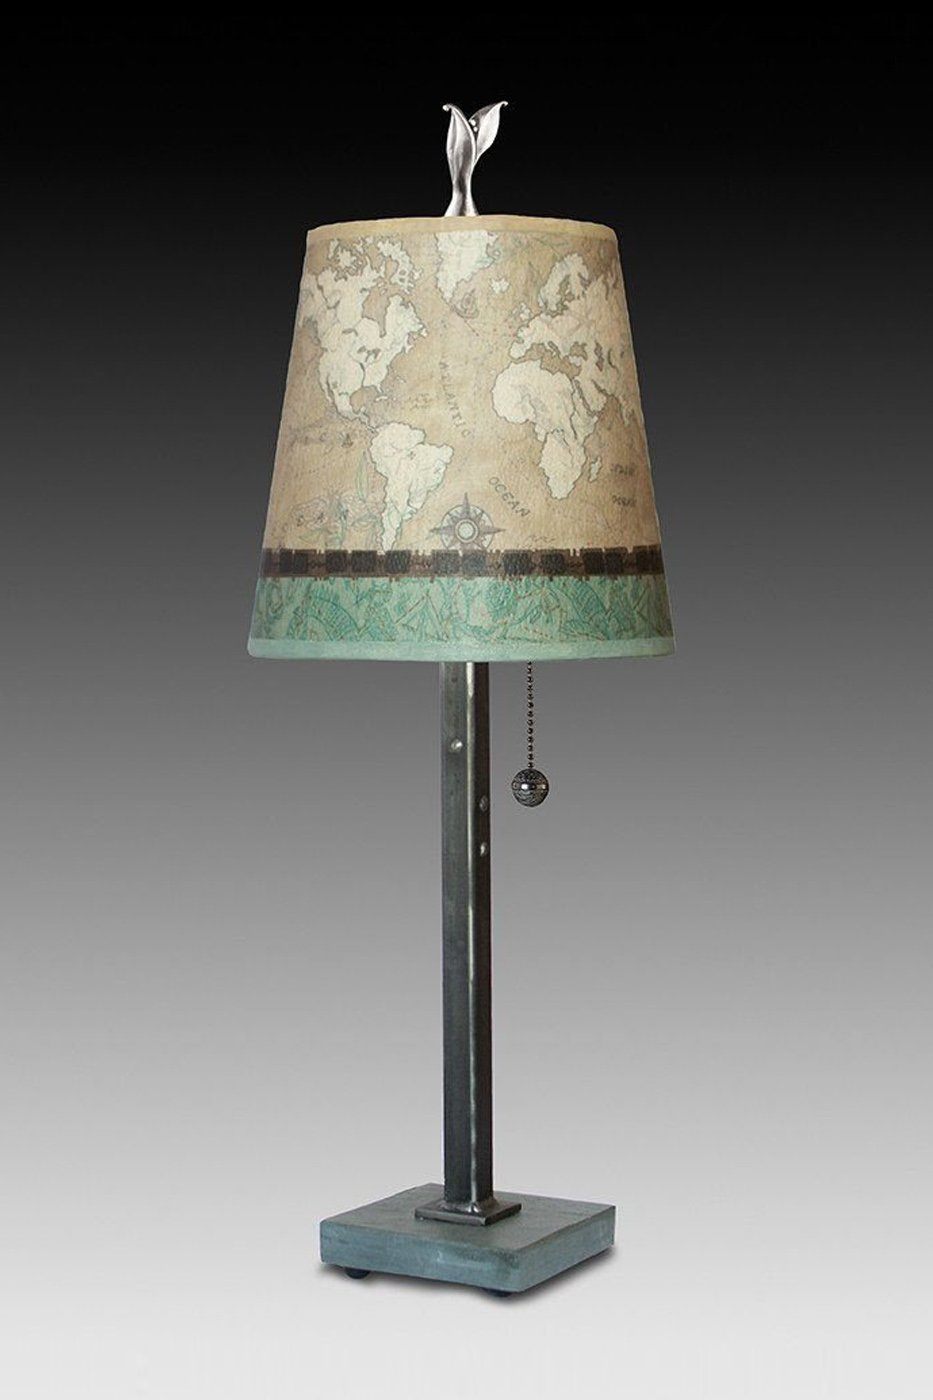 Janna Ugone & Co Table Lamps Steel Table Lamp with Small Drum Shade in Voyages